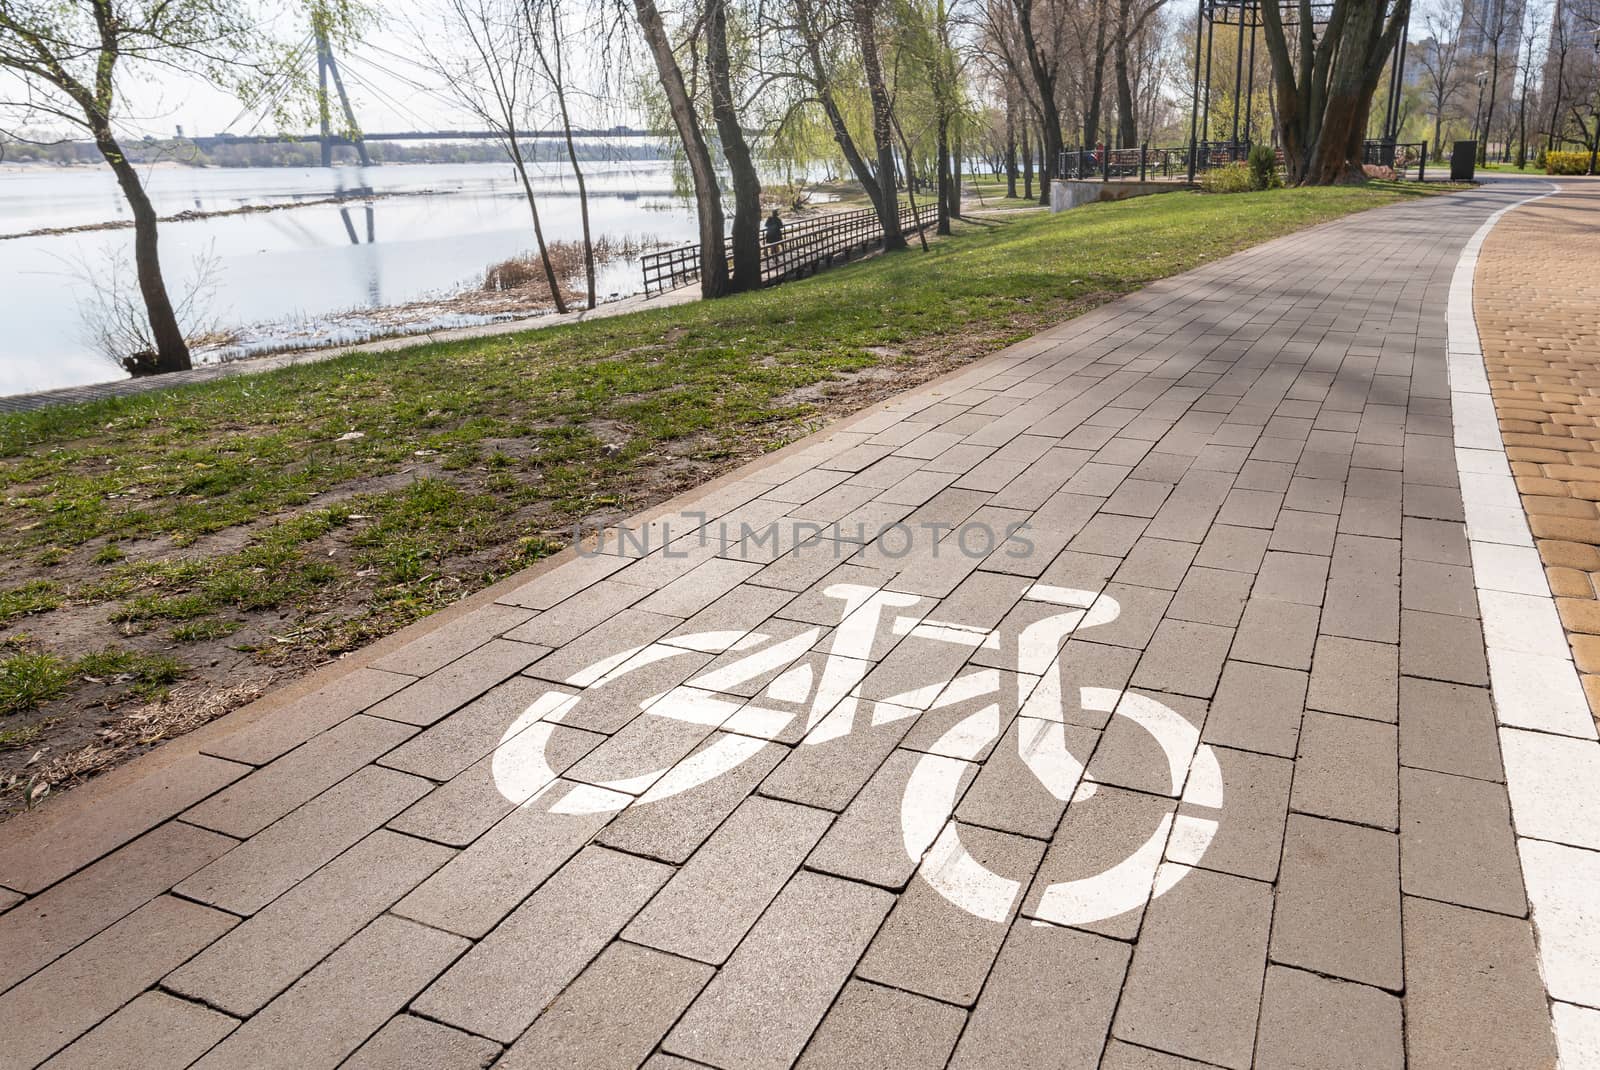 White bike path sign painted on a lane in the Natalka park of Kiev, Ukraine